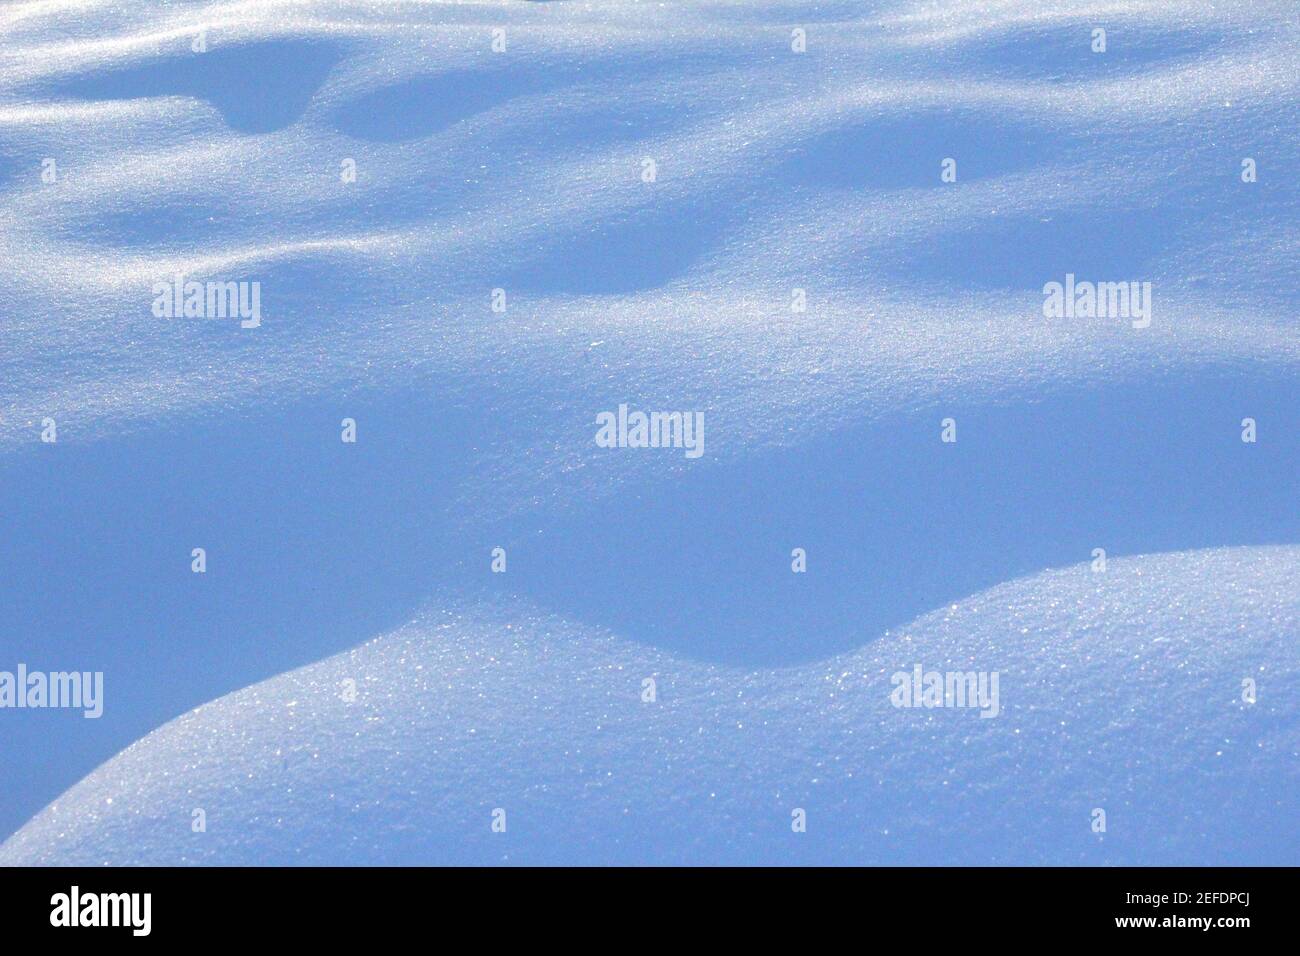 Snowfield and snow in the sunlight in winter, abstract background image Stock Photo